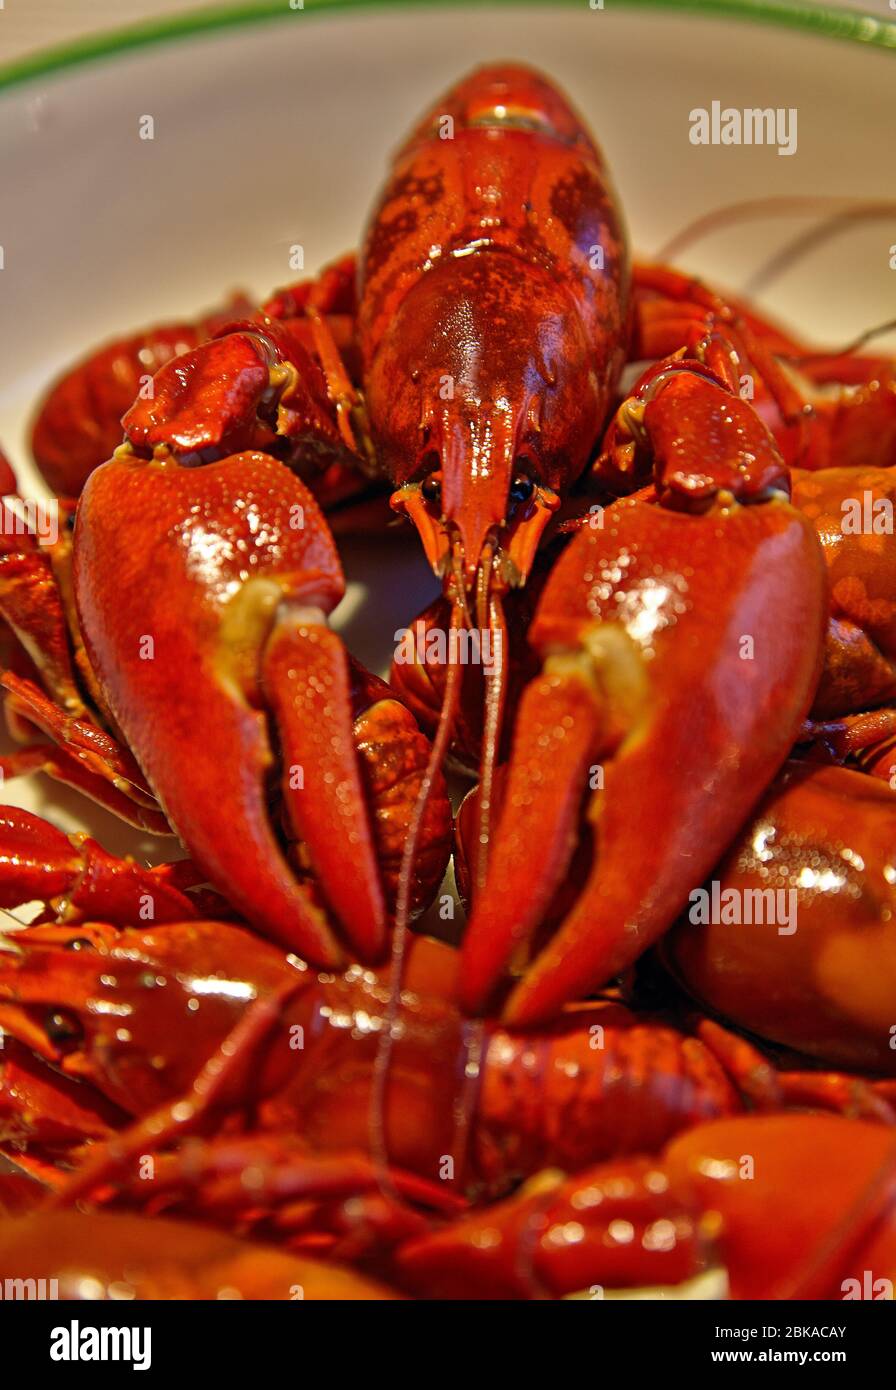 Boiled crayfish close-up, delicious food, diet food Stock Photo